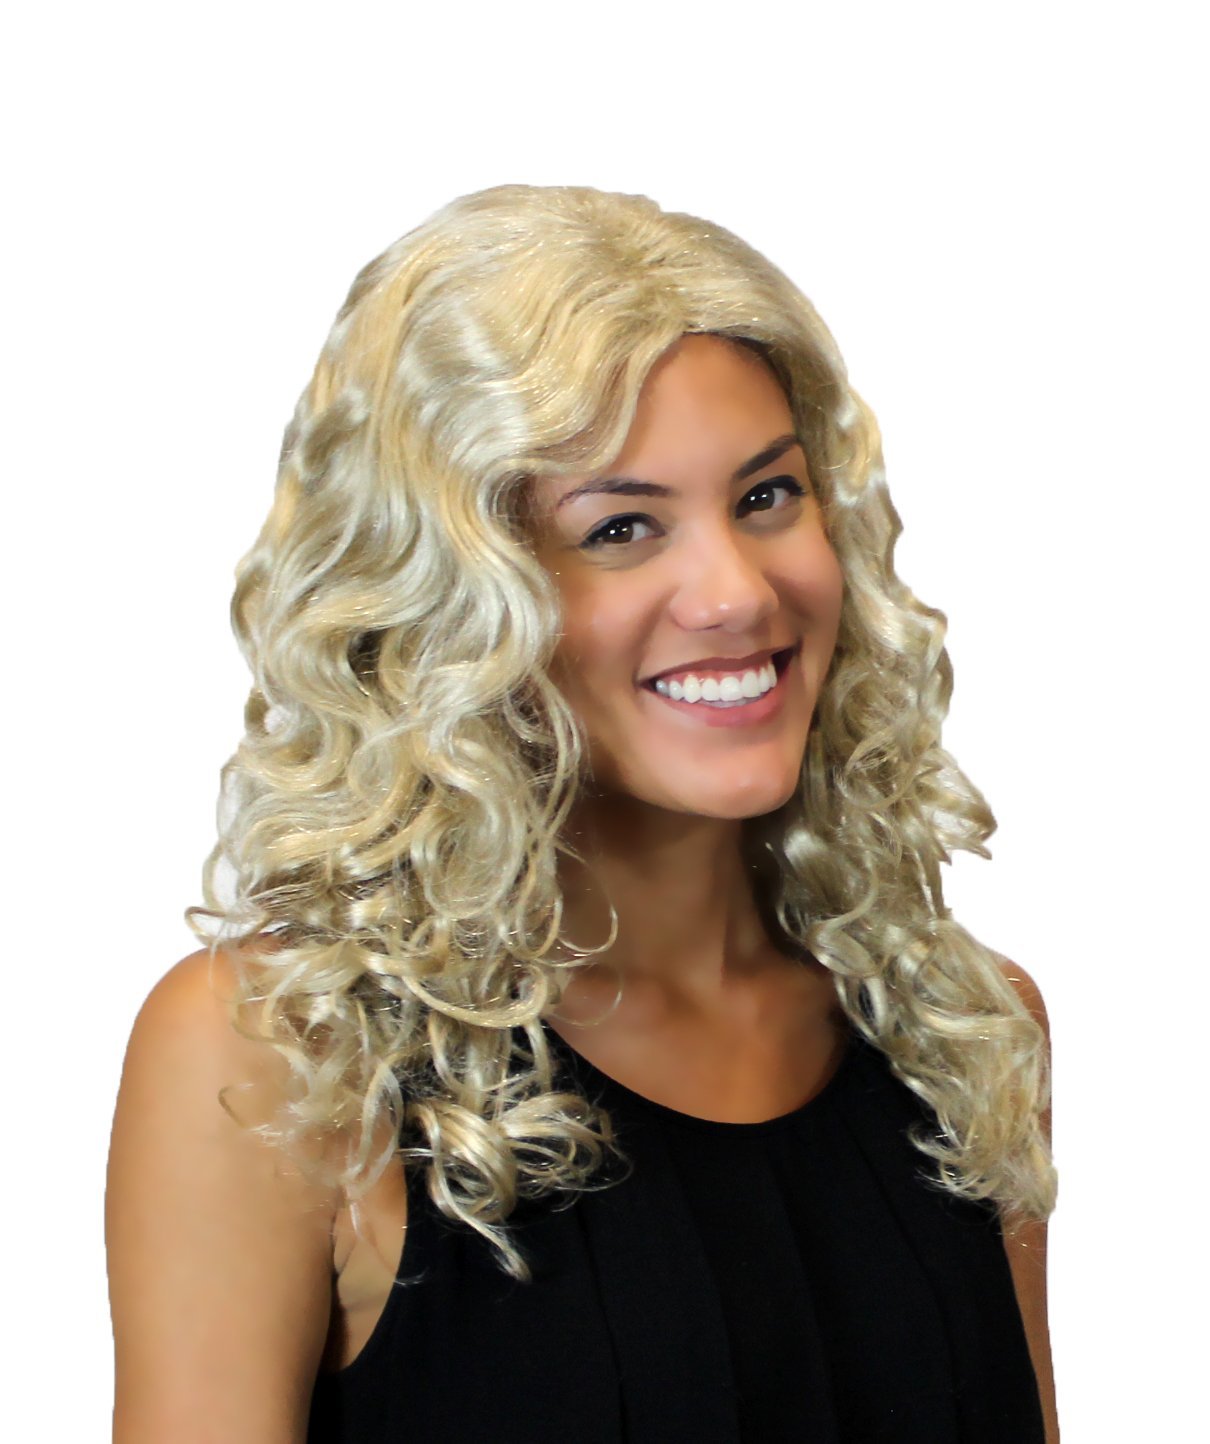 Blonde Passion Womens Wig | Long Curly Glamour Cosplay Halloween Wig Premium Bre